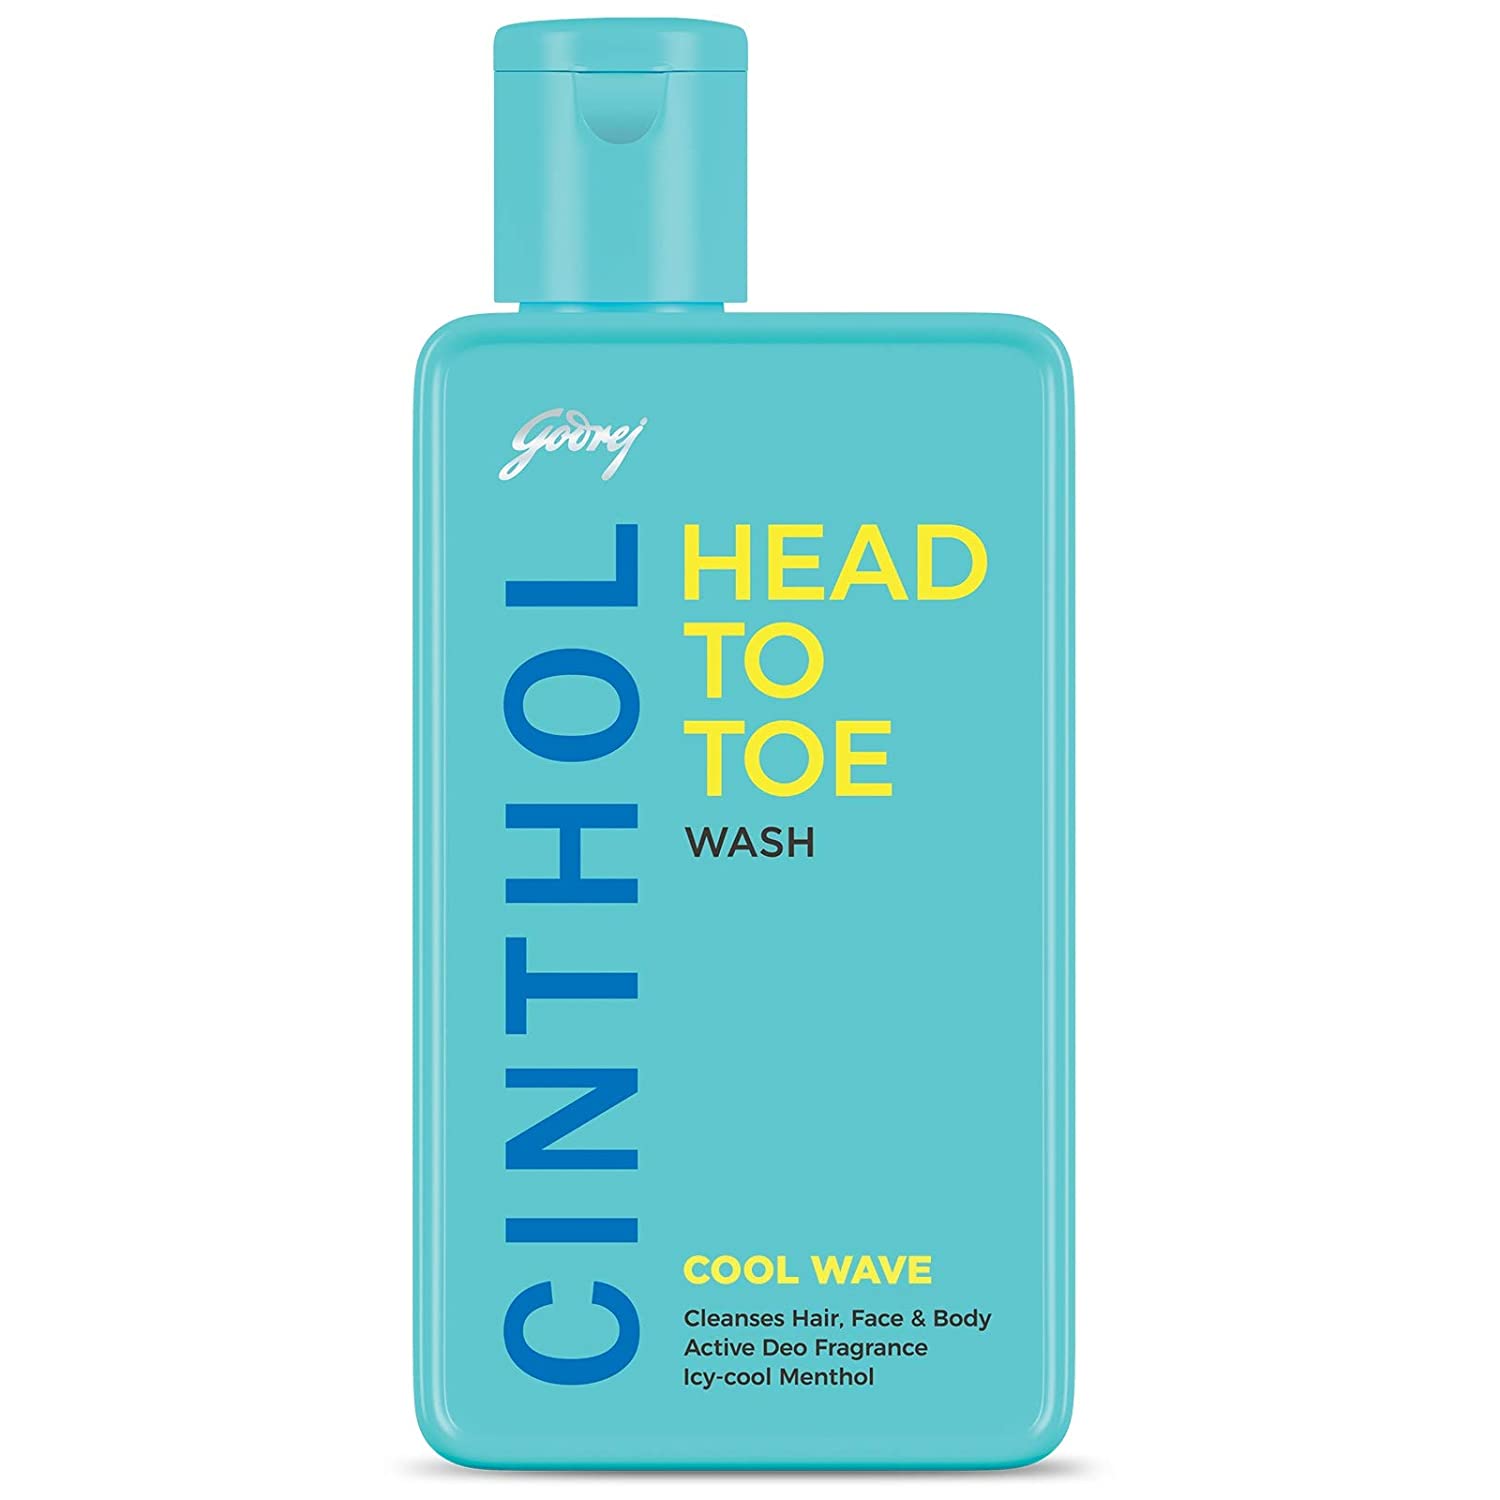 Cinthol Head to Toe, 3-in-1 Wash (Shampoo, Face and Body) – COOL WAVE, 190ml